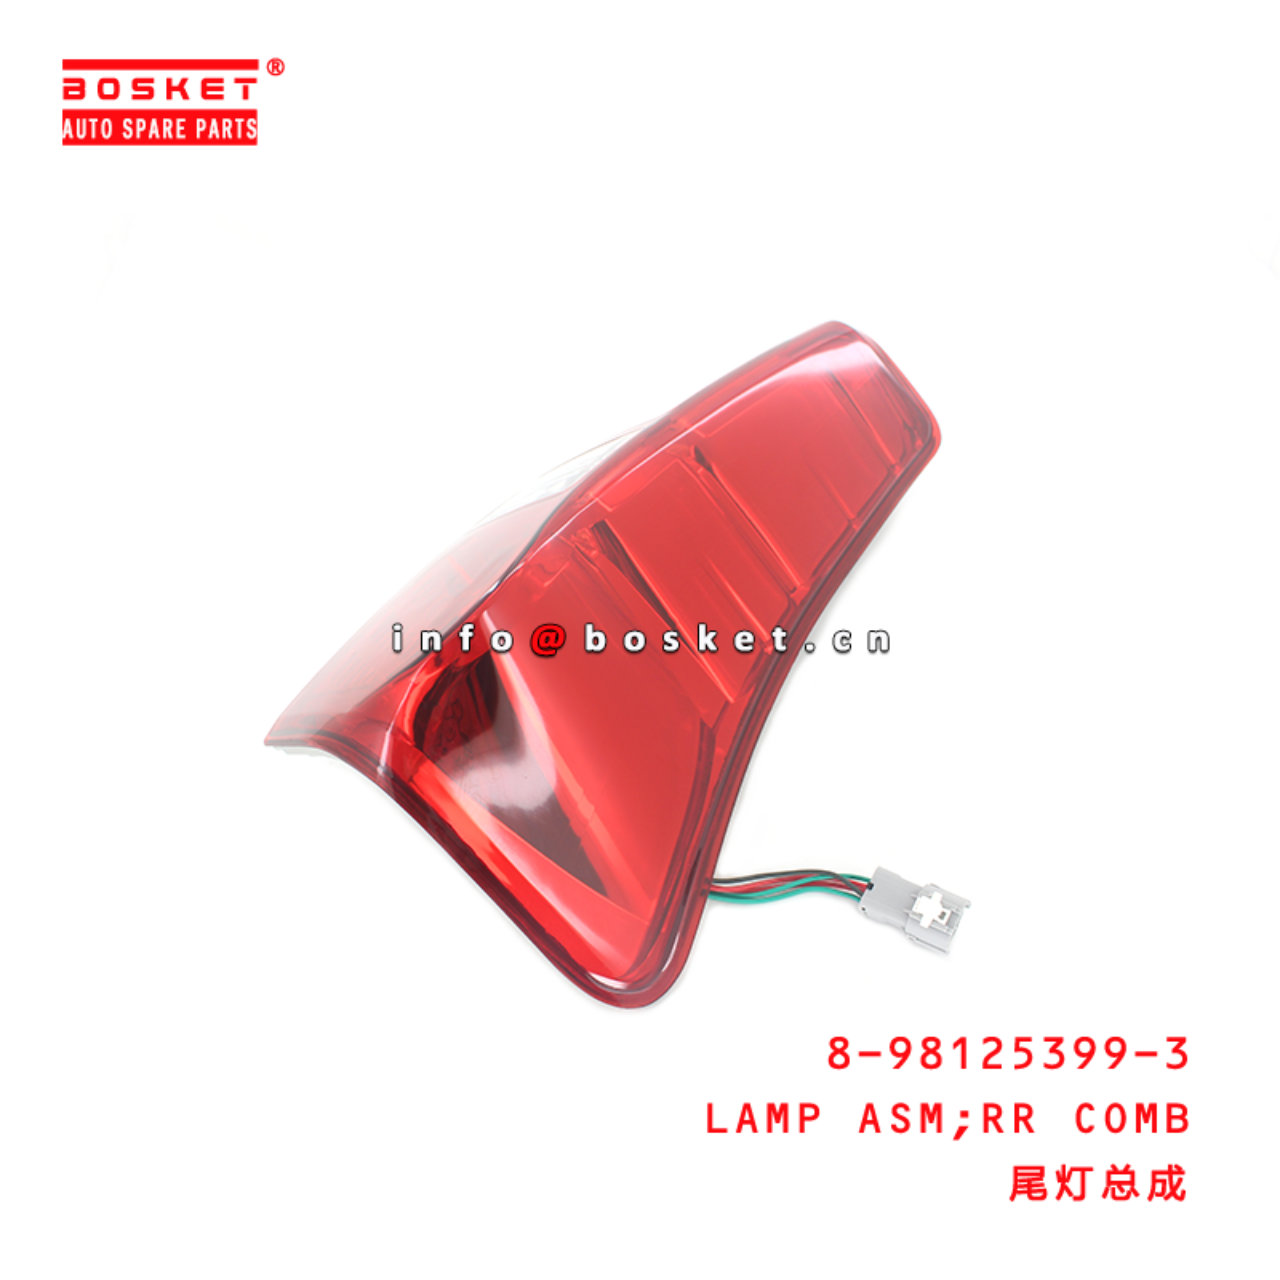 8-98125399-3 Rear Combination Lamp Assembly 8981253993 Suitable for ISUZU D-MAX12